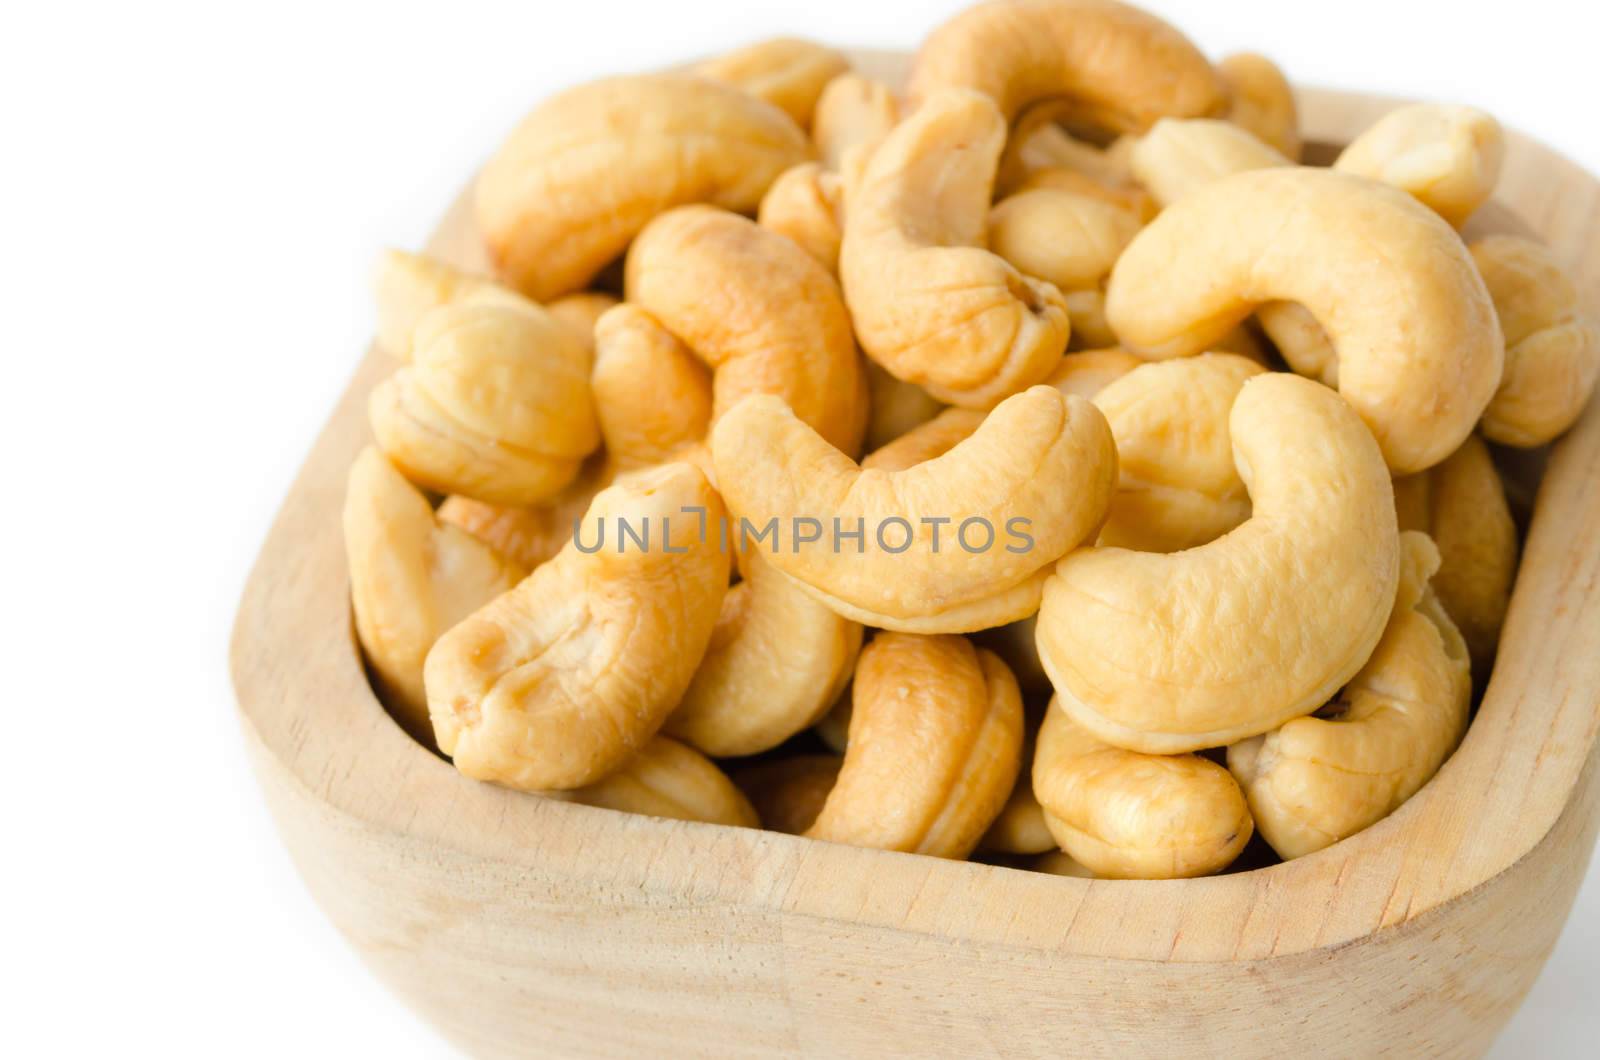 Roasted cashews nuts in wooden bowl on white background.